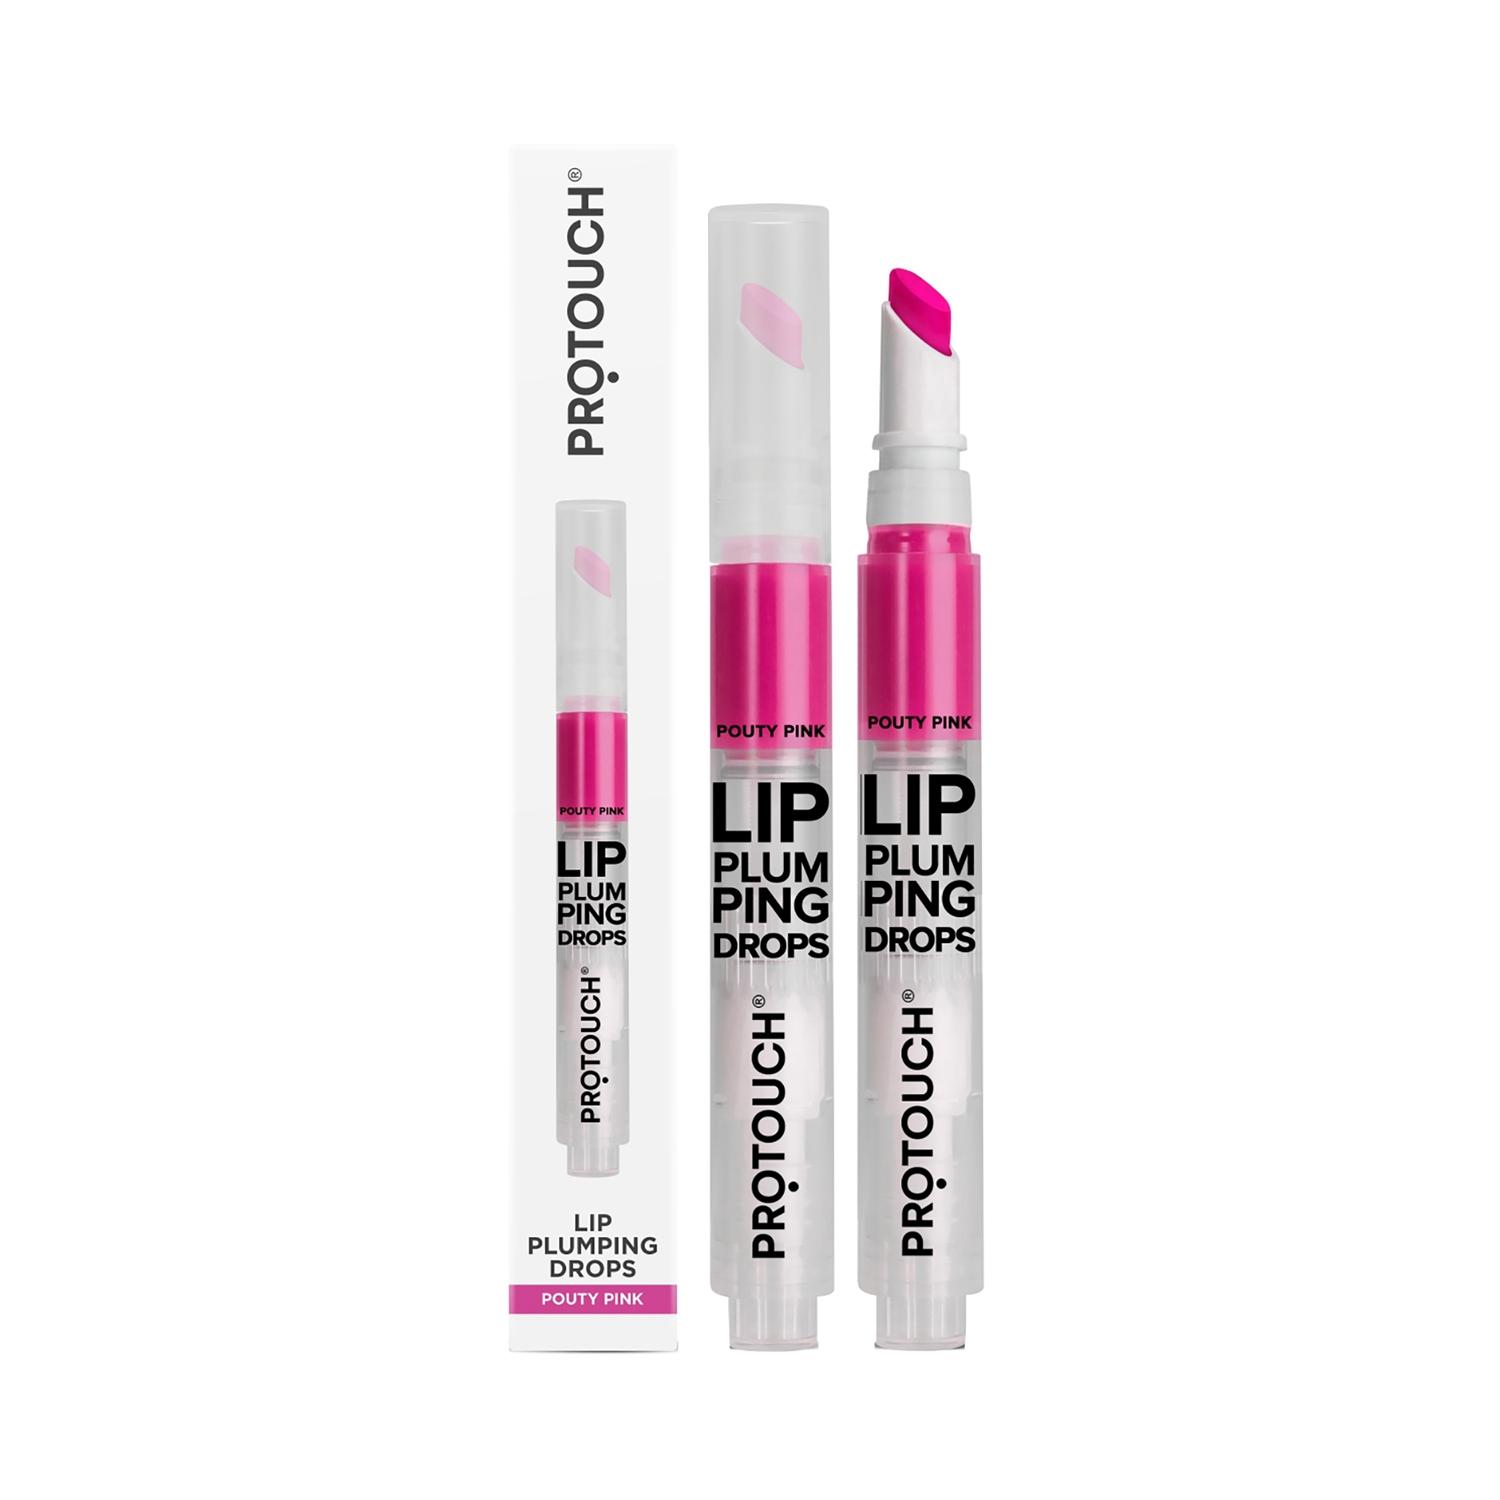 protouch lip plumping drops - pouty pink (2.8ml)